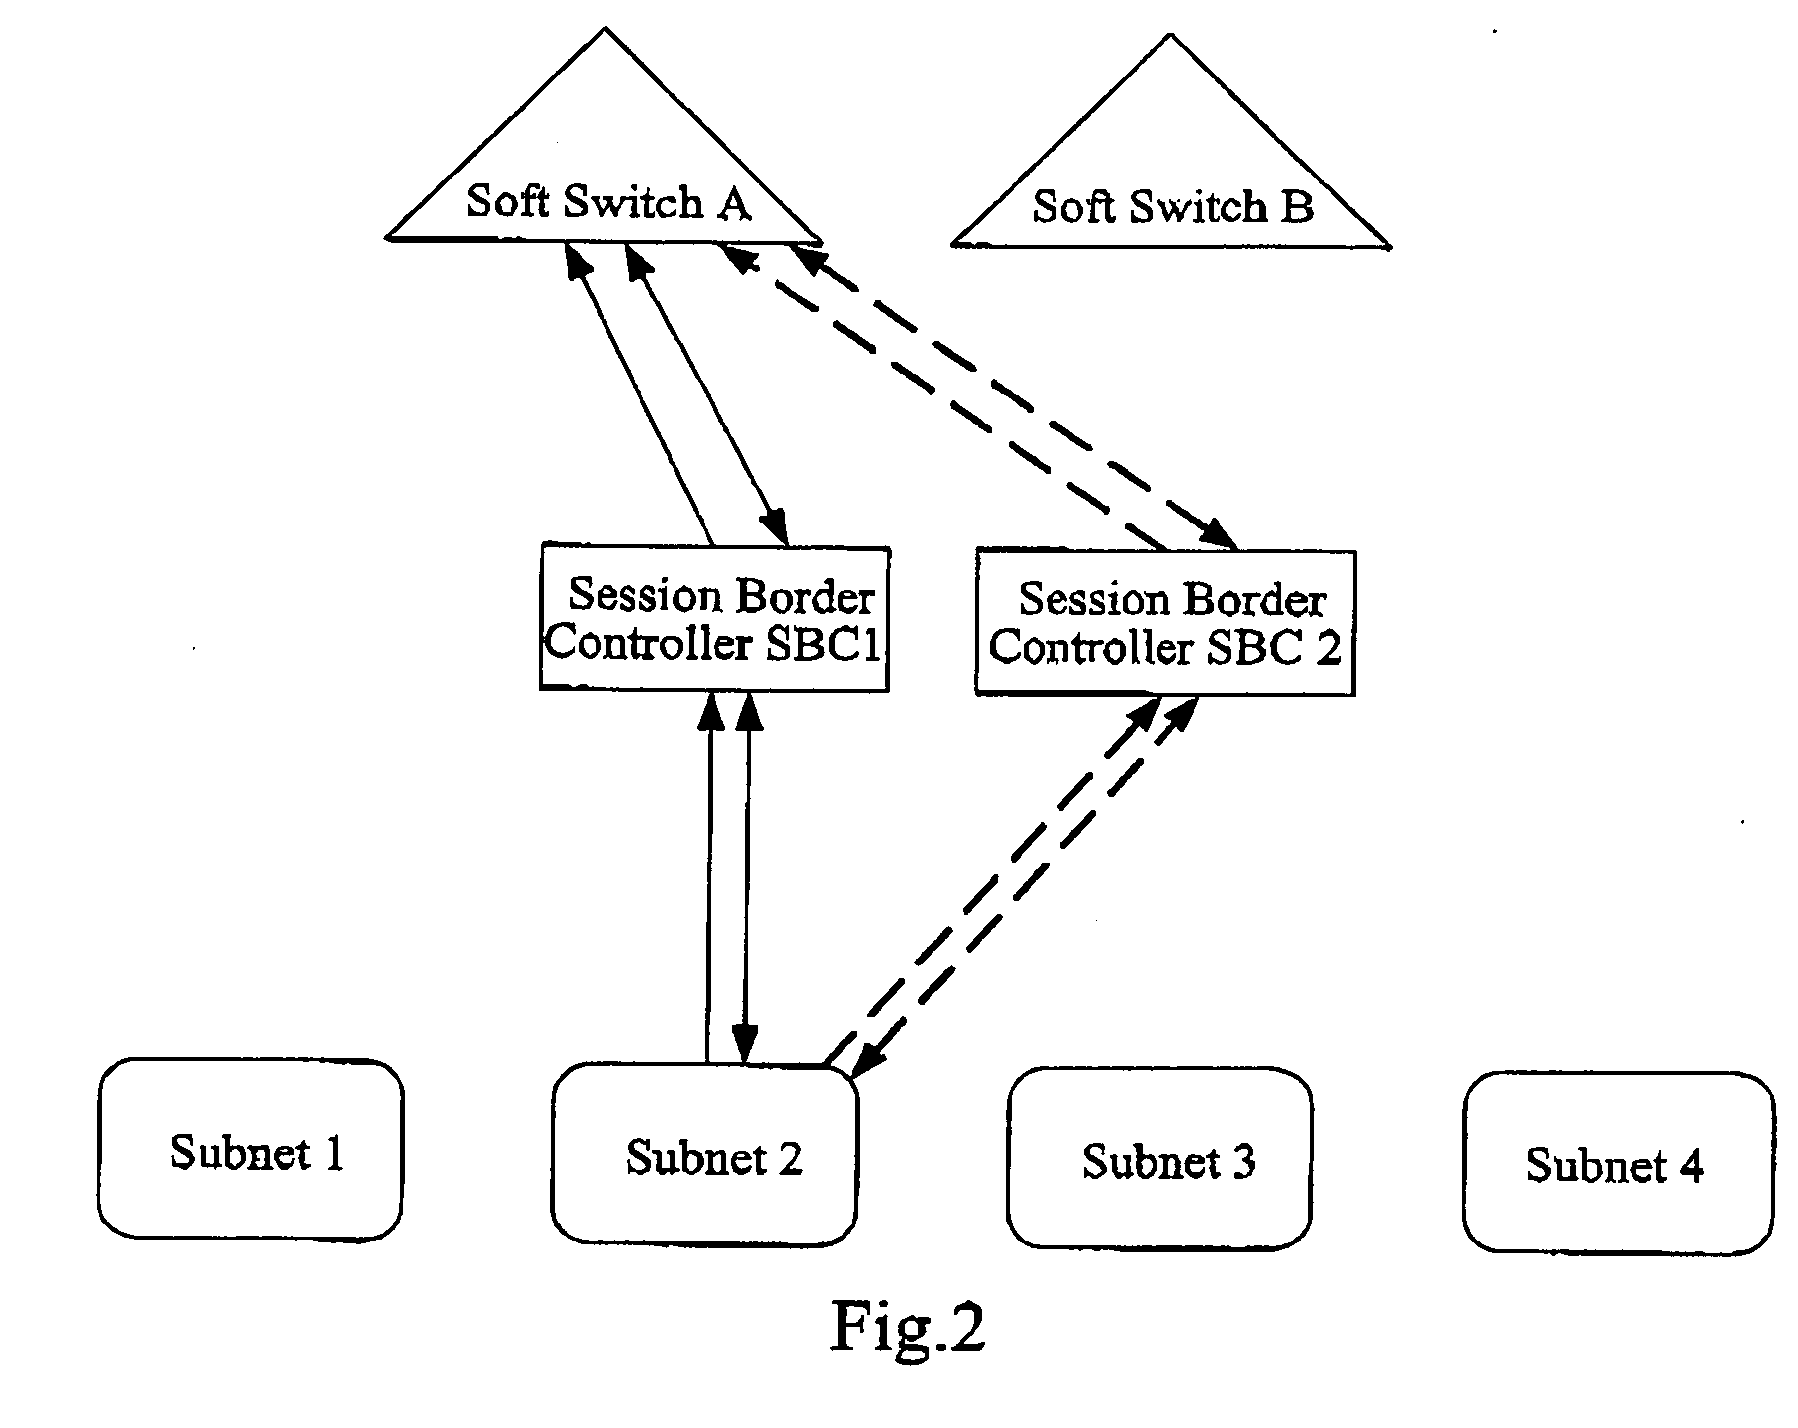 Method and system for implementing backup based on session border controllers